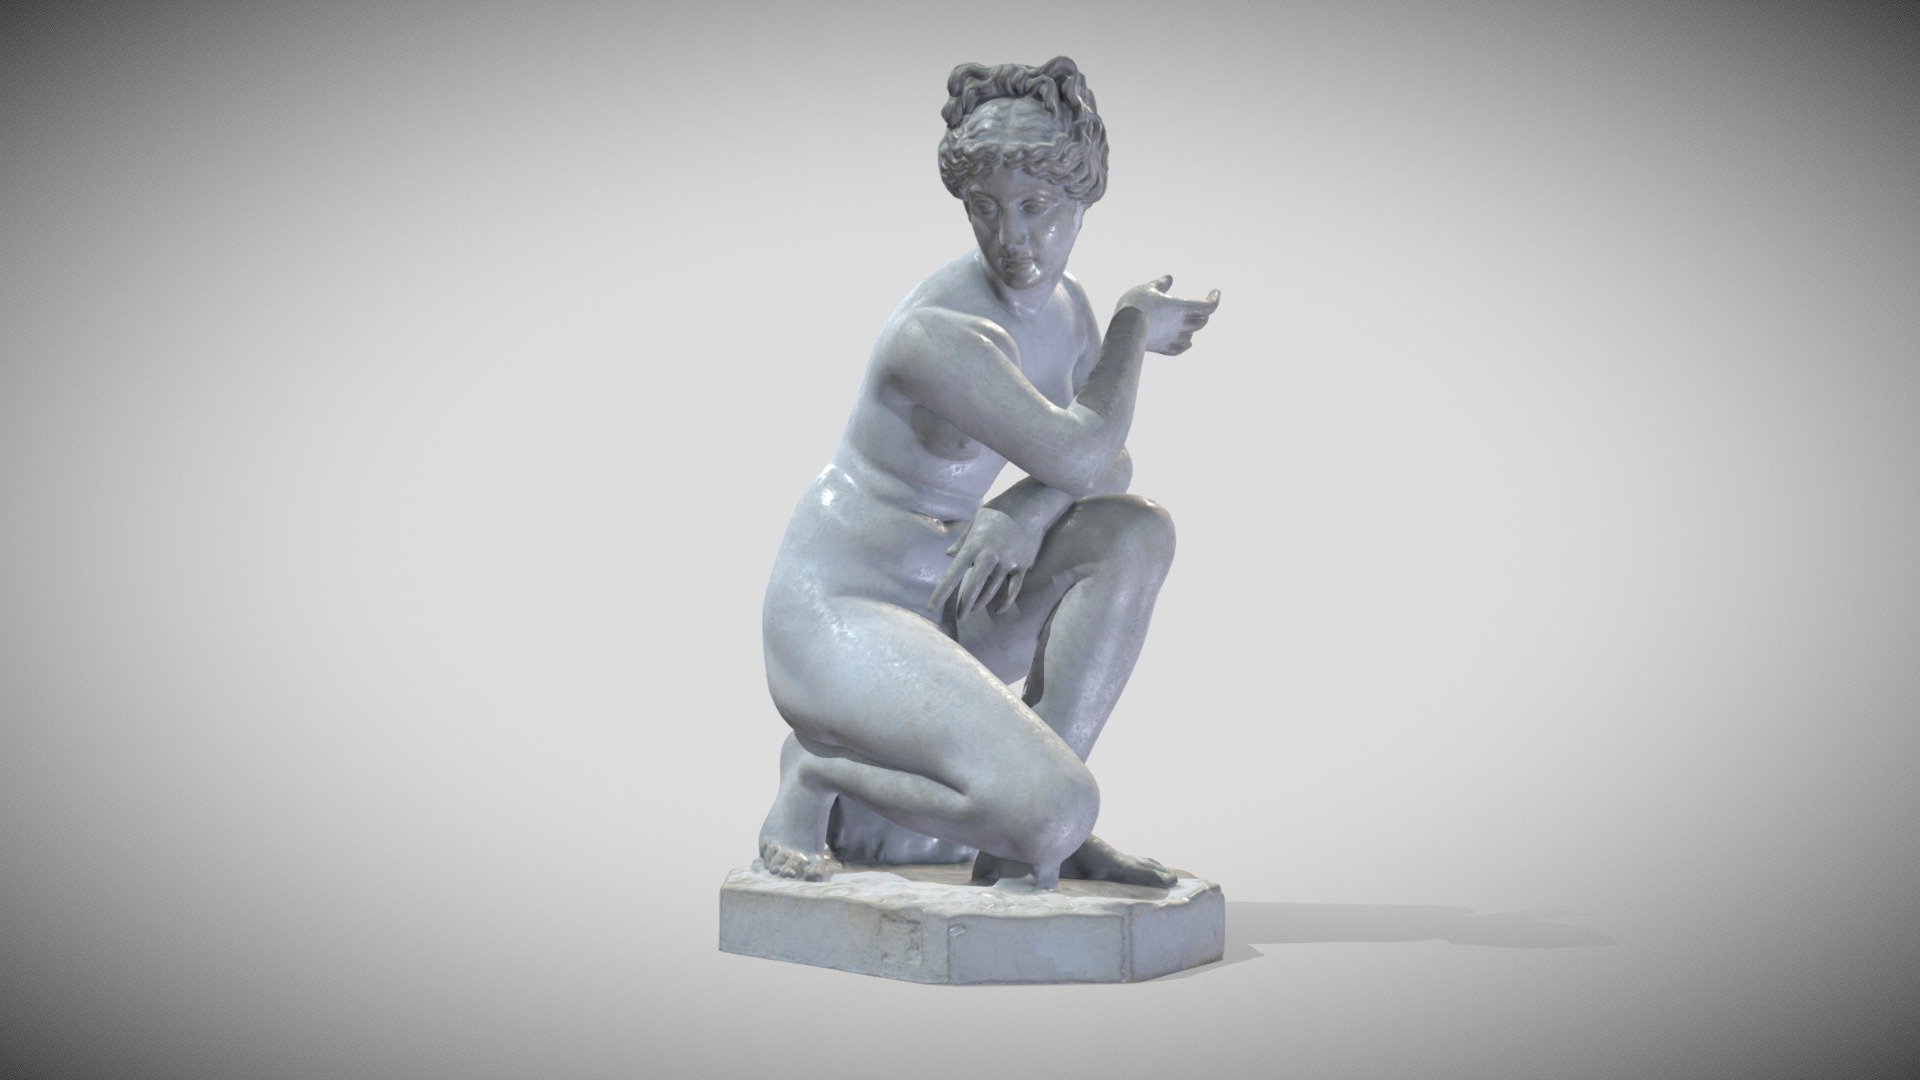 Original very nice 3D Scan from the SMK - Statens Museum for Kunst

http://collection.smk.dk/#/en/detail/KAS618

here the Painted Gaming Version LR... 3d model